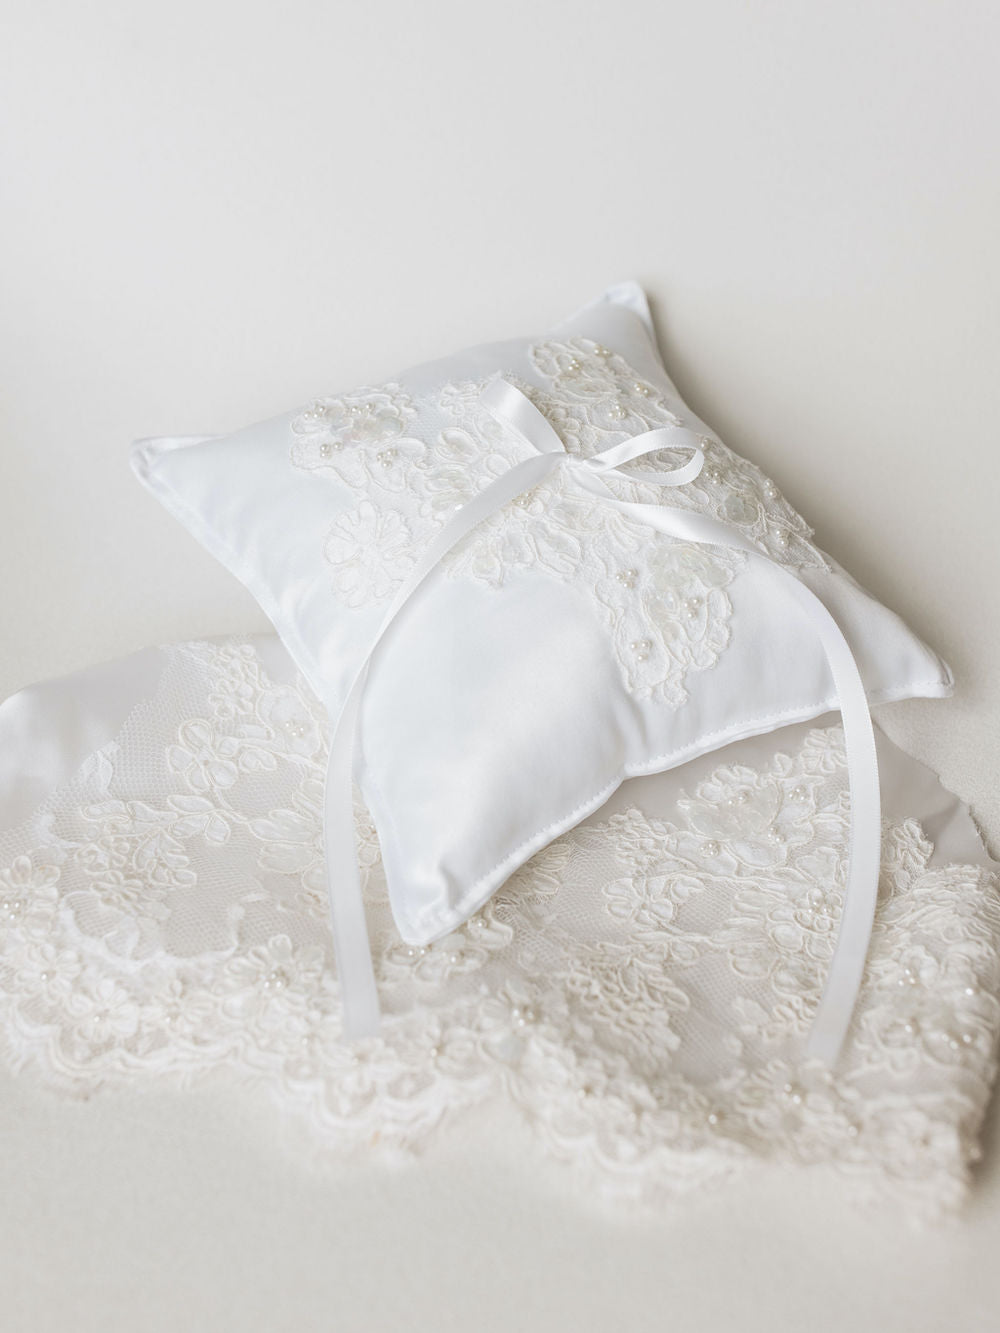 a wedding ring bearer pillow handmade with lace and pearls from the bride's mother's wedding dress by expert heirloom designer, The Garter Girl